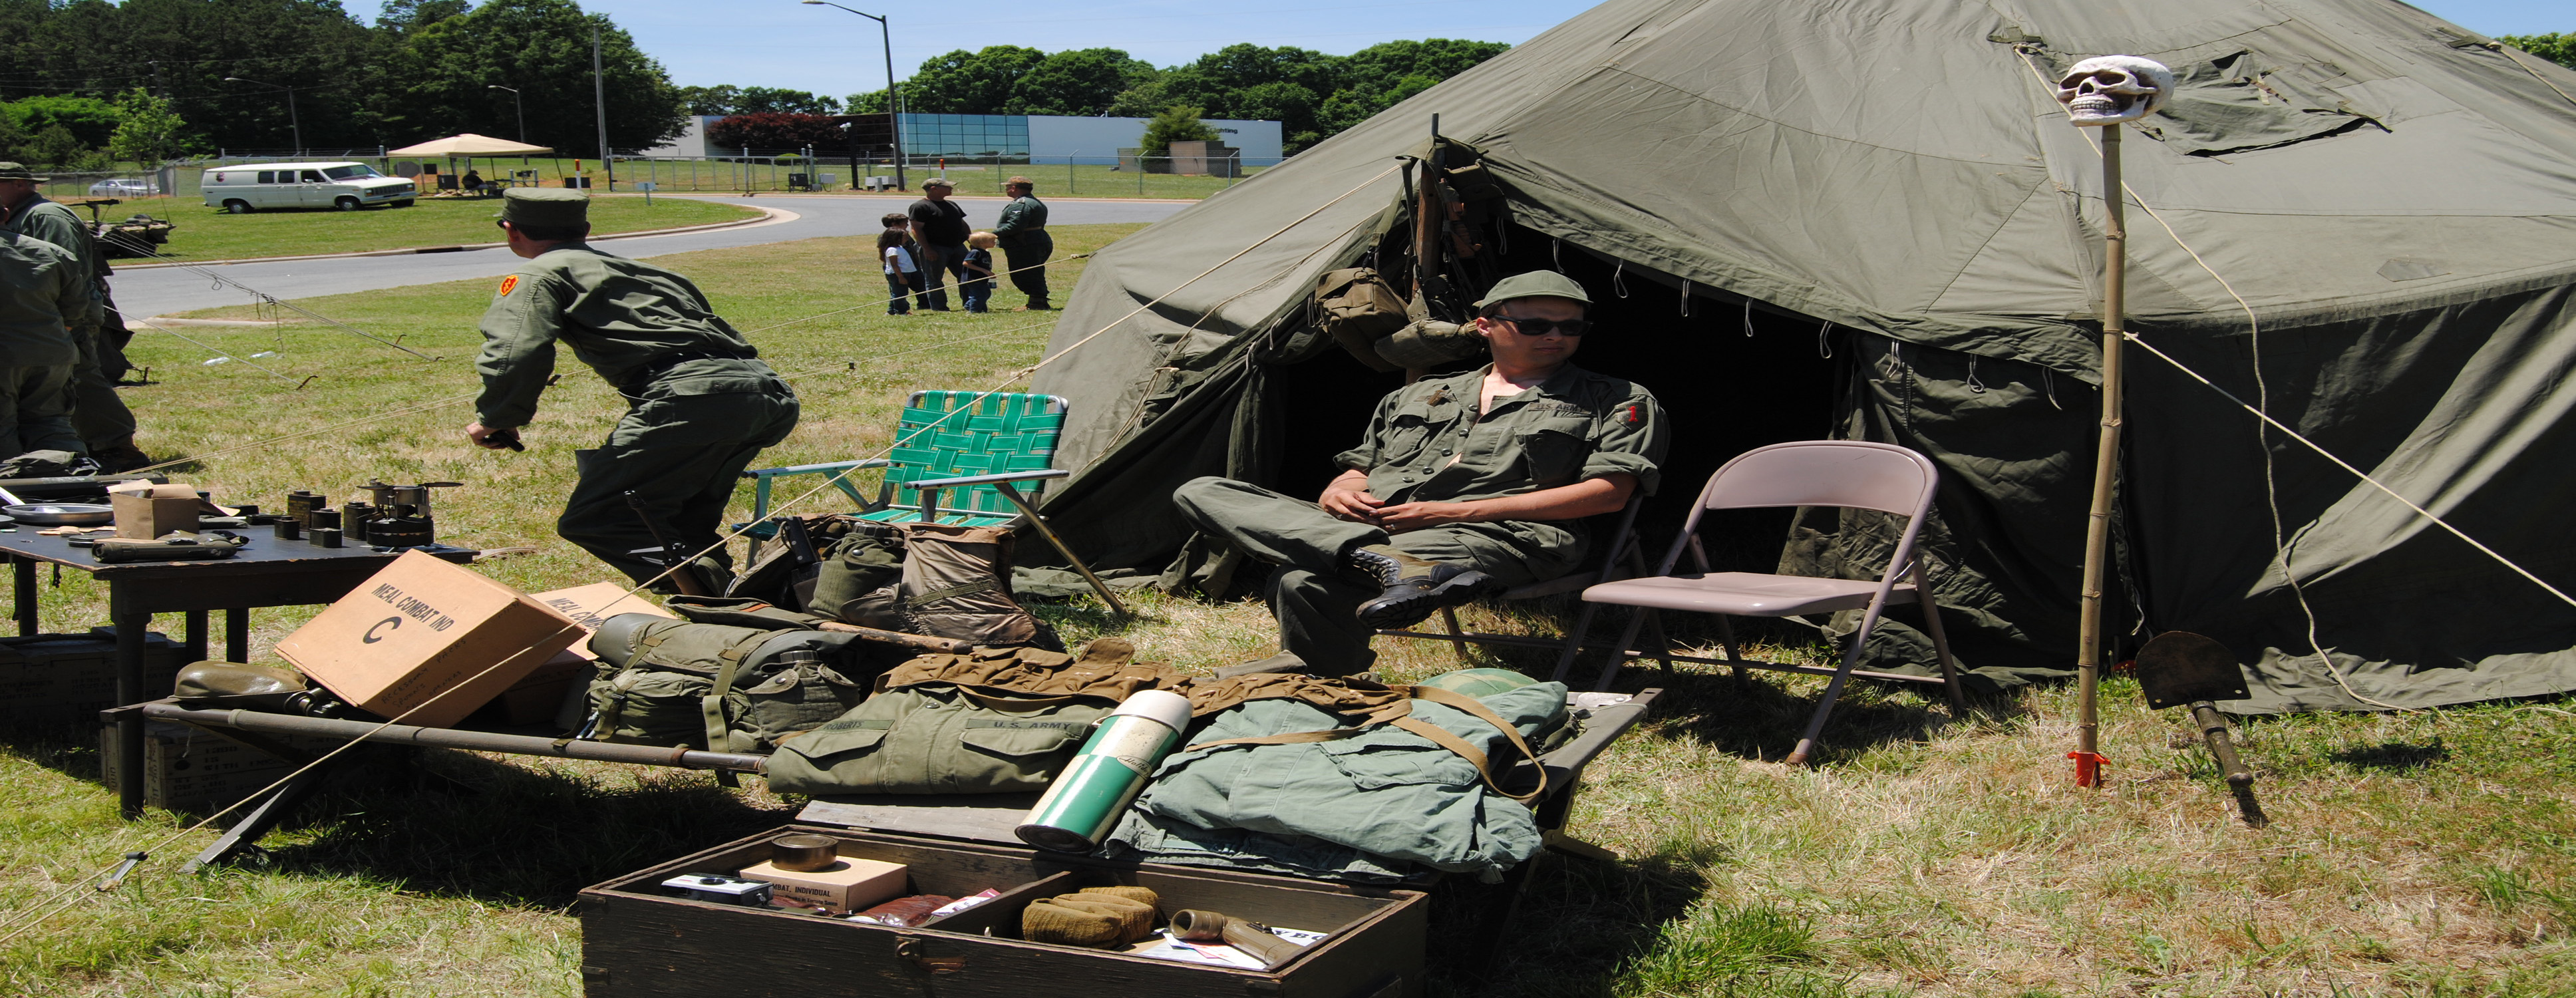 2nd Annual Military History Show - Granville County TDA